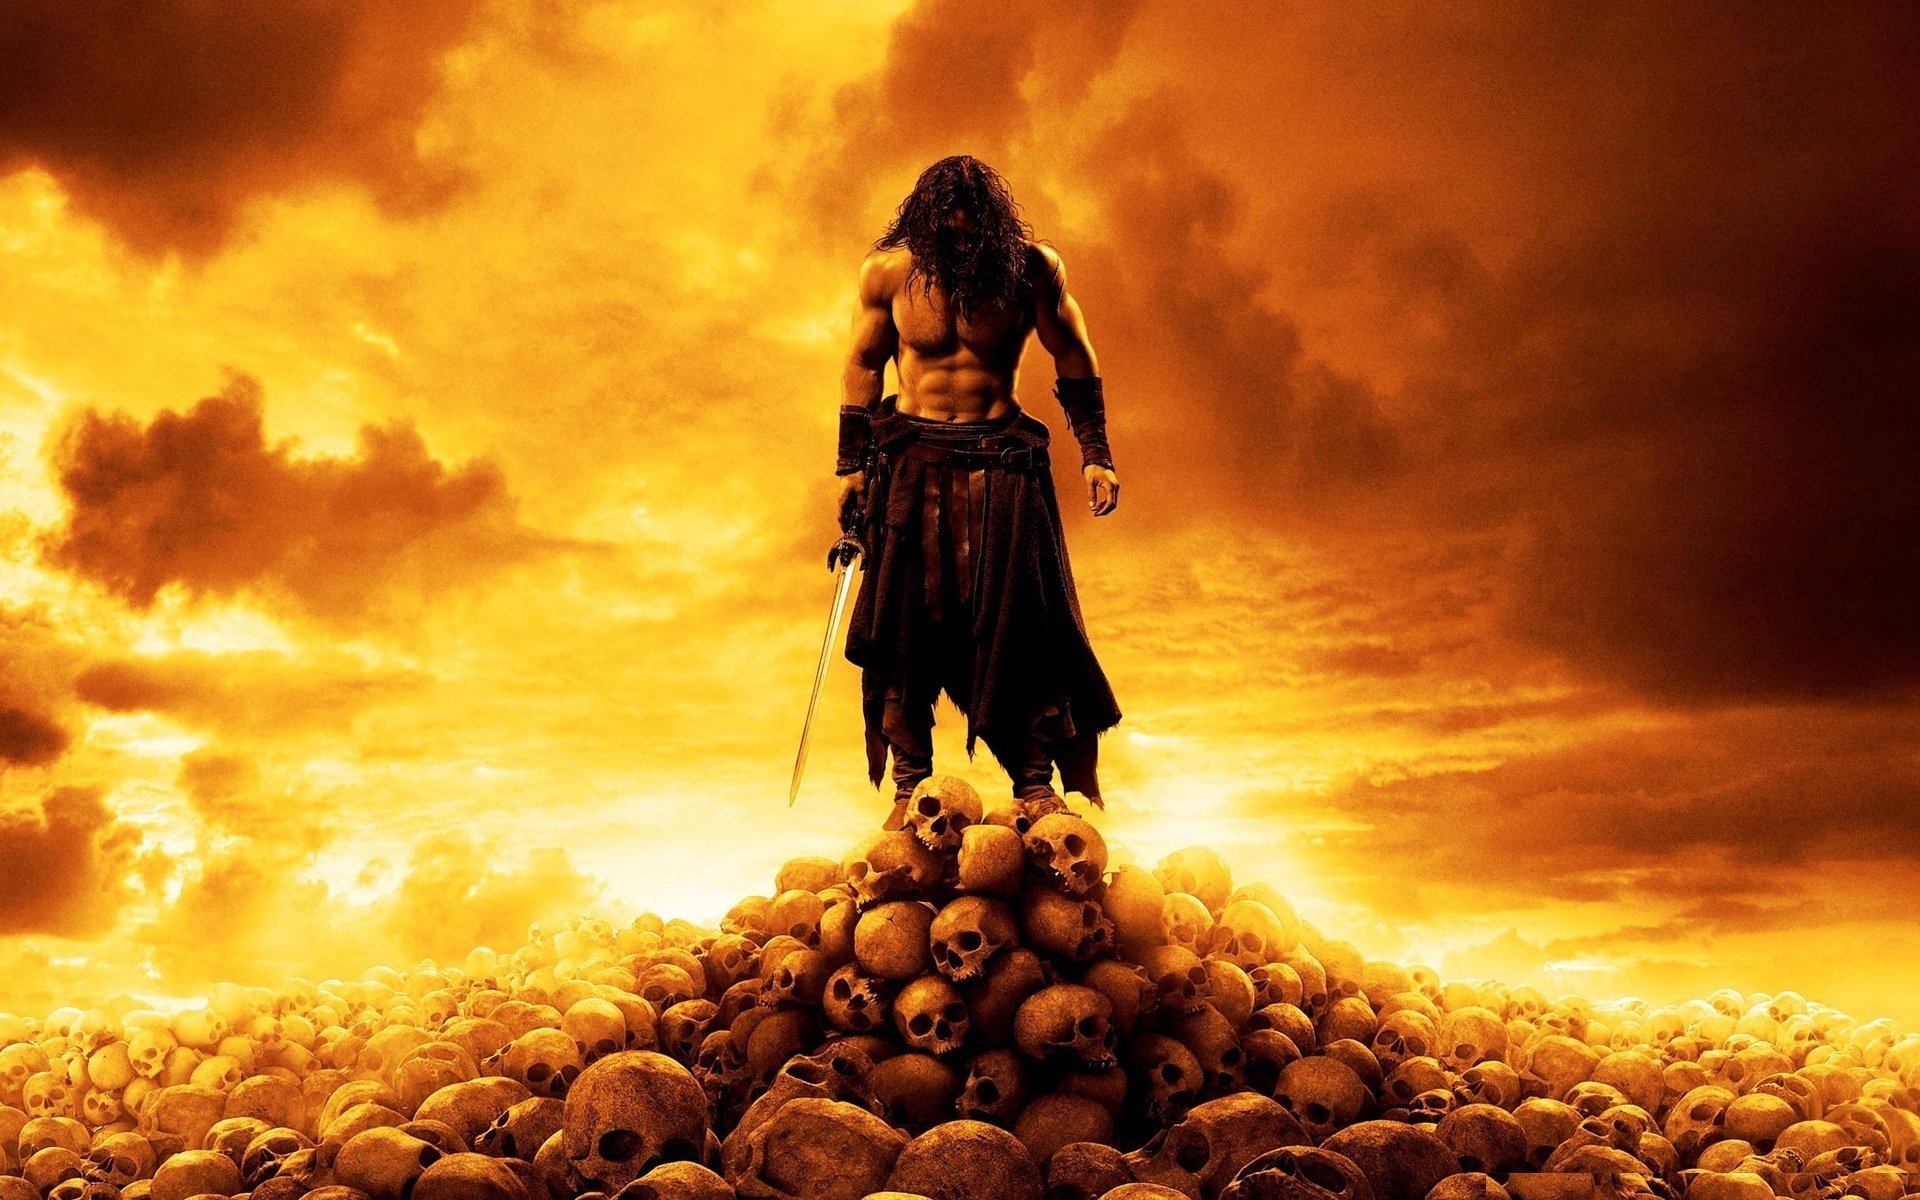 23 Conan The Barbarian (2011) HD Wallpapers | Backgrounds ...